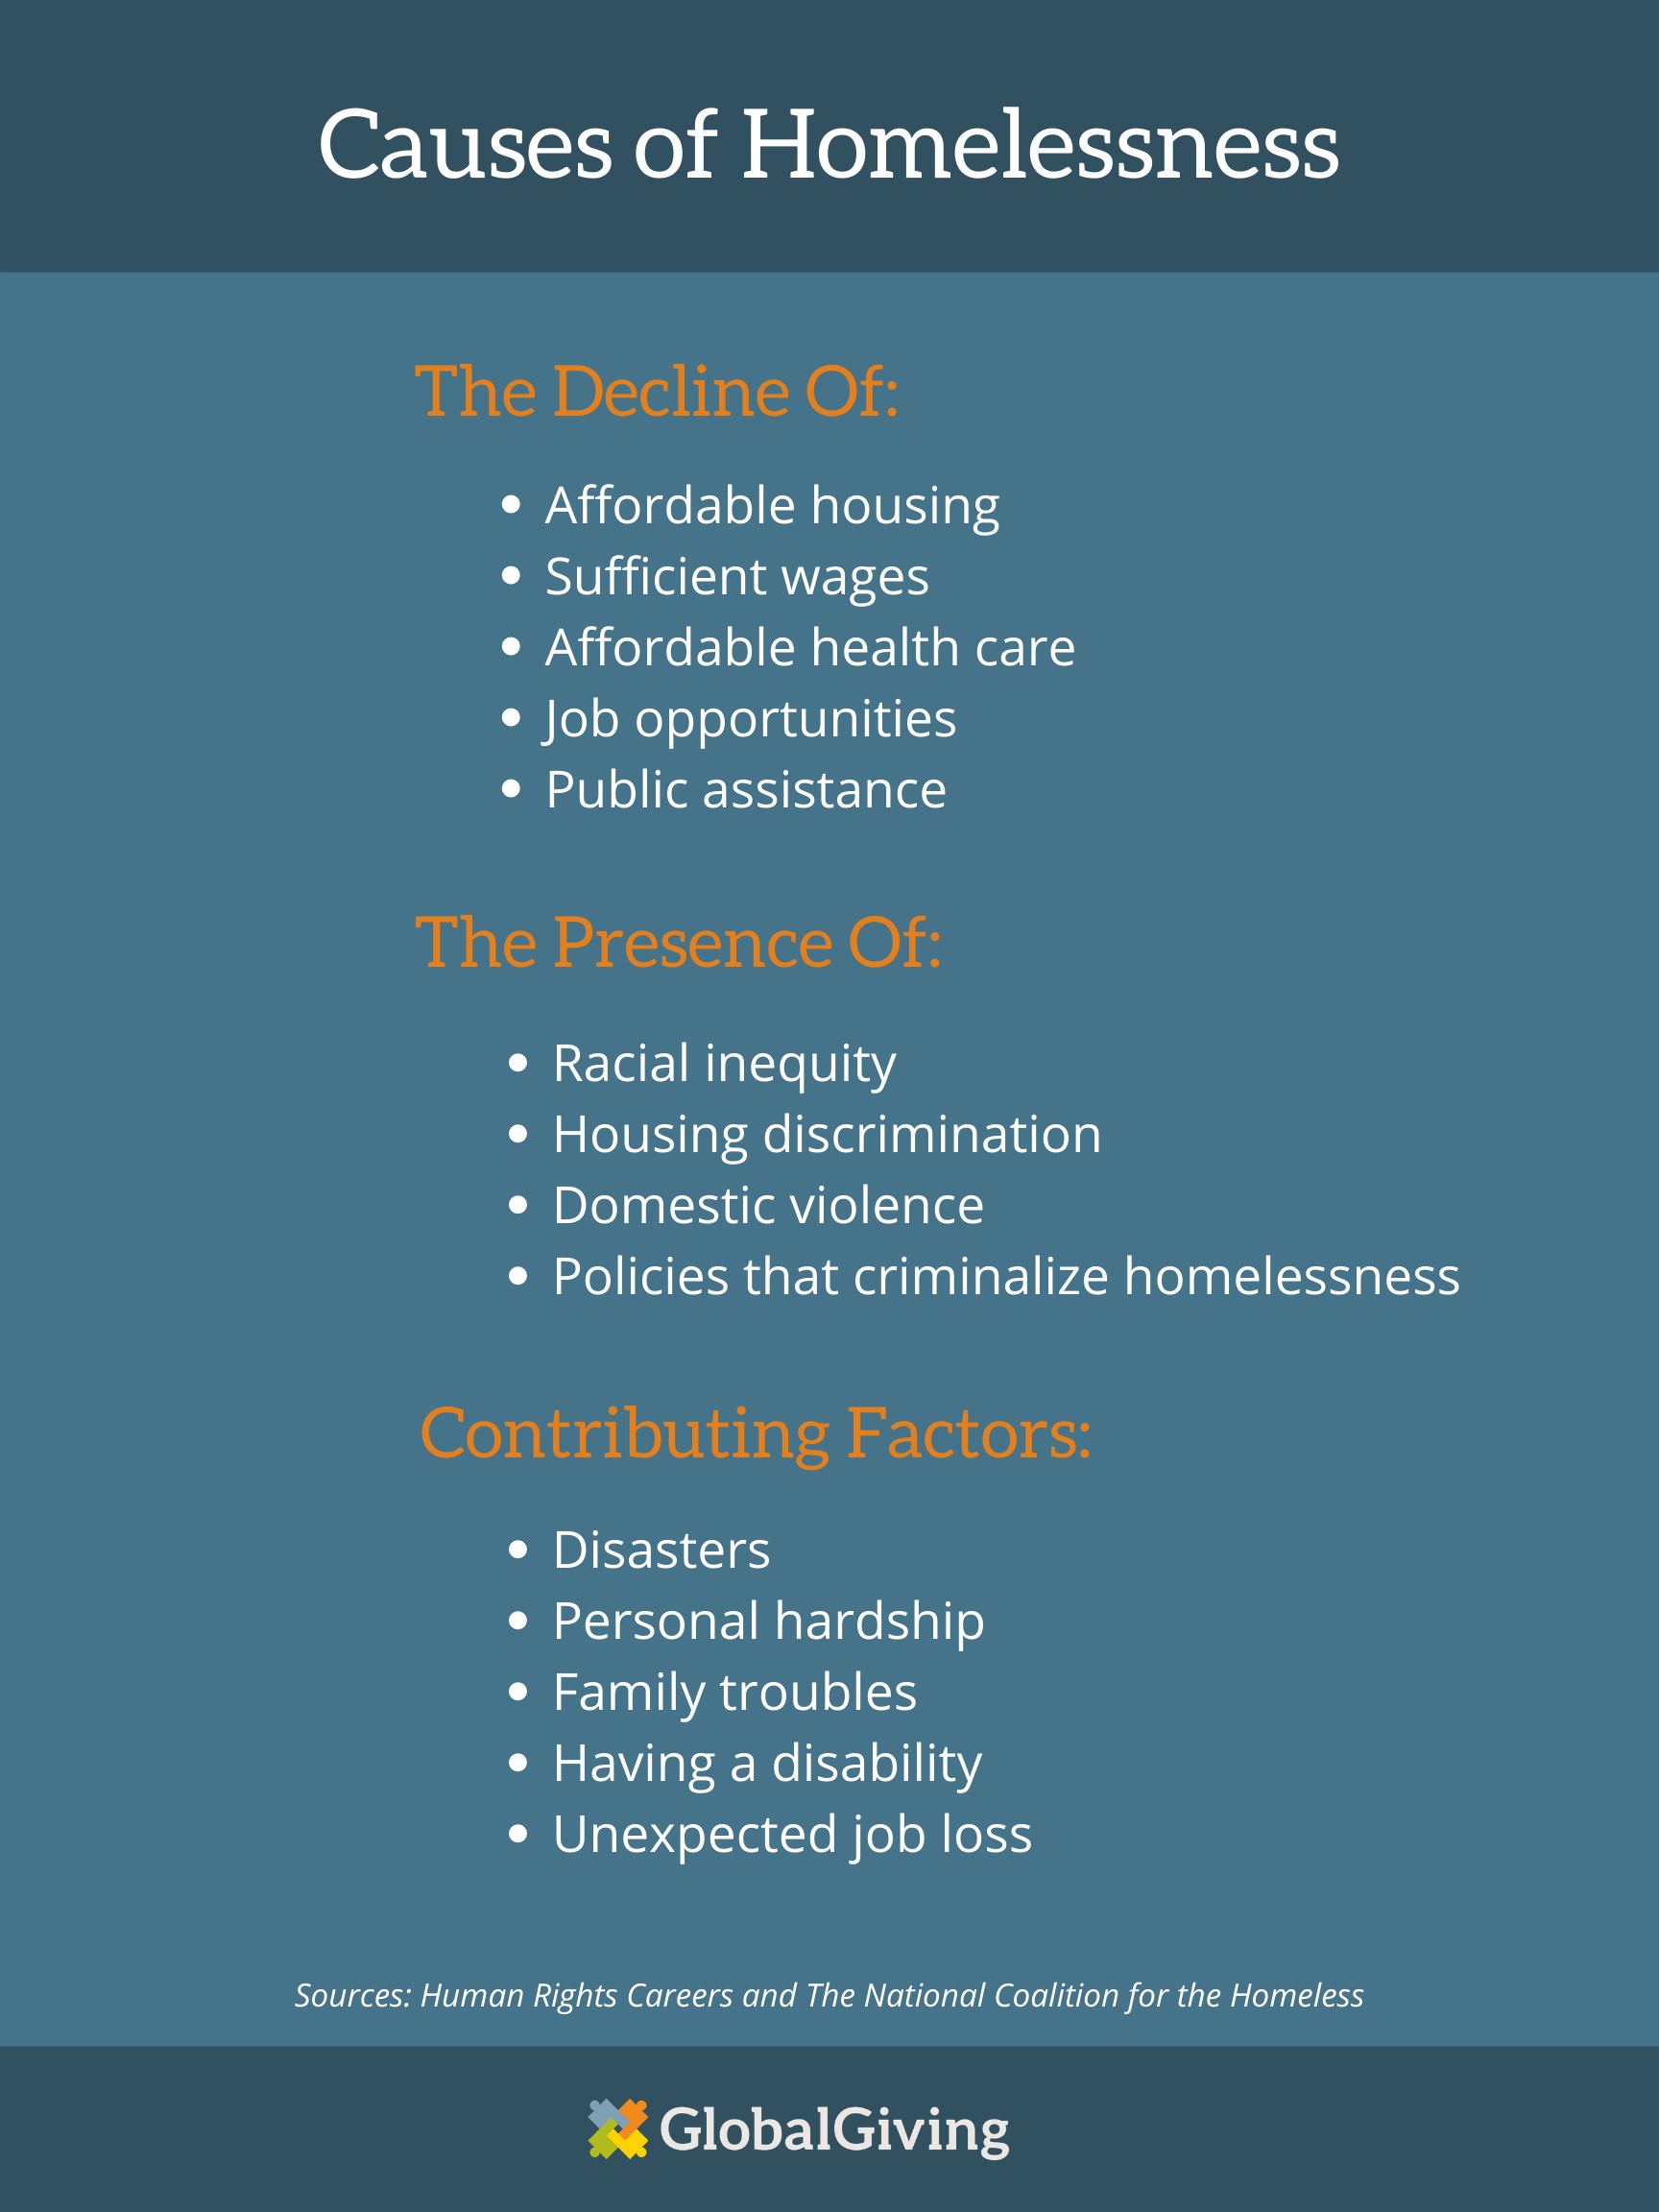 Graphic that states the causes of homelessness in America